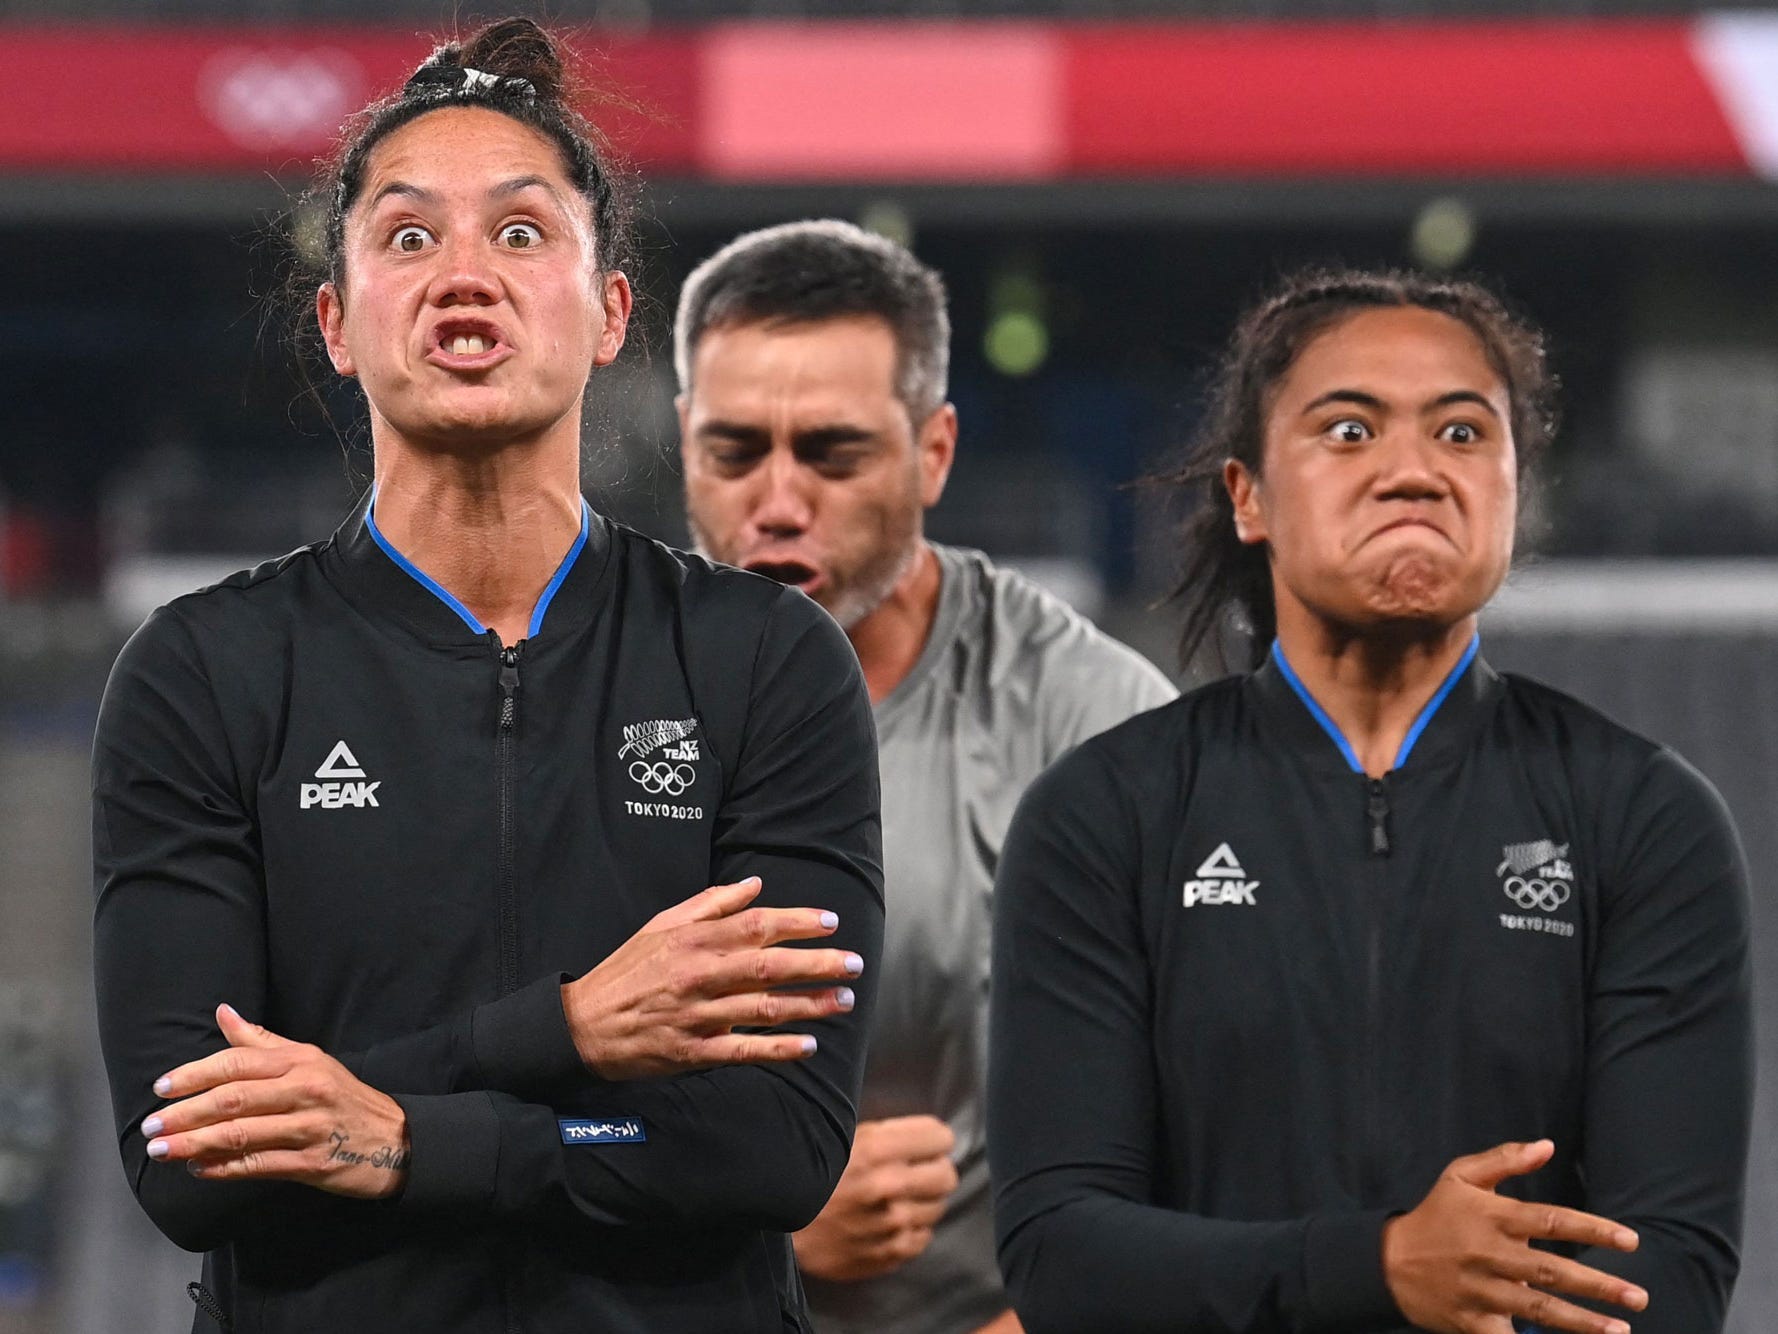 New Zealand's women's rugby team celebrates with haka at Tokyo 2020.